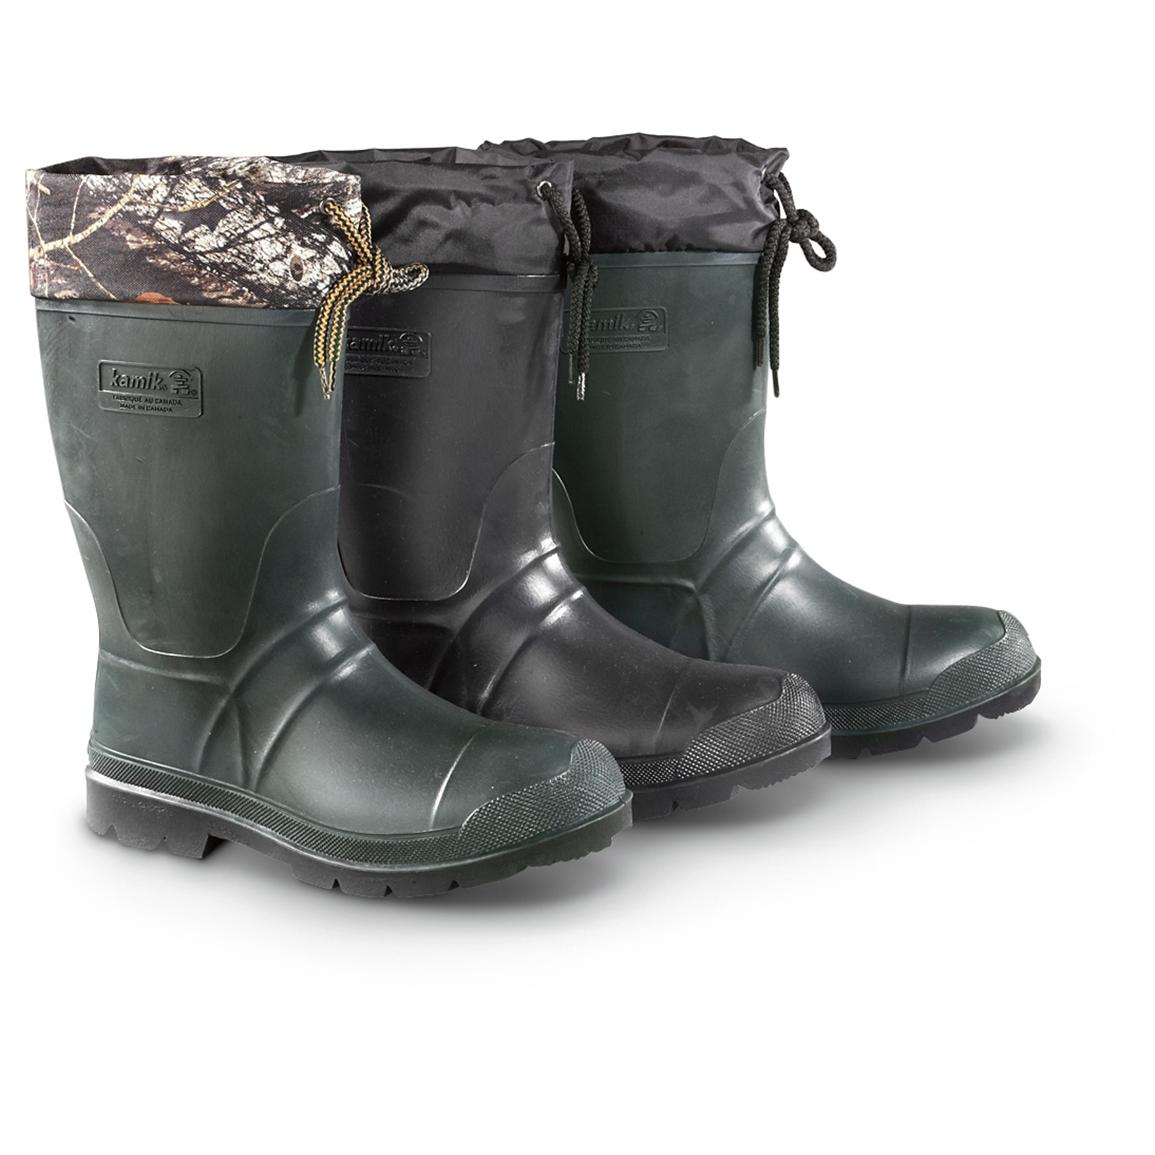 kamik menu0027s sportsman rubber boots, waterproof, insulated - pictured from  left to right: ... VMLDSWQ